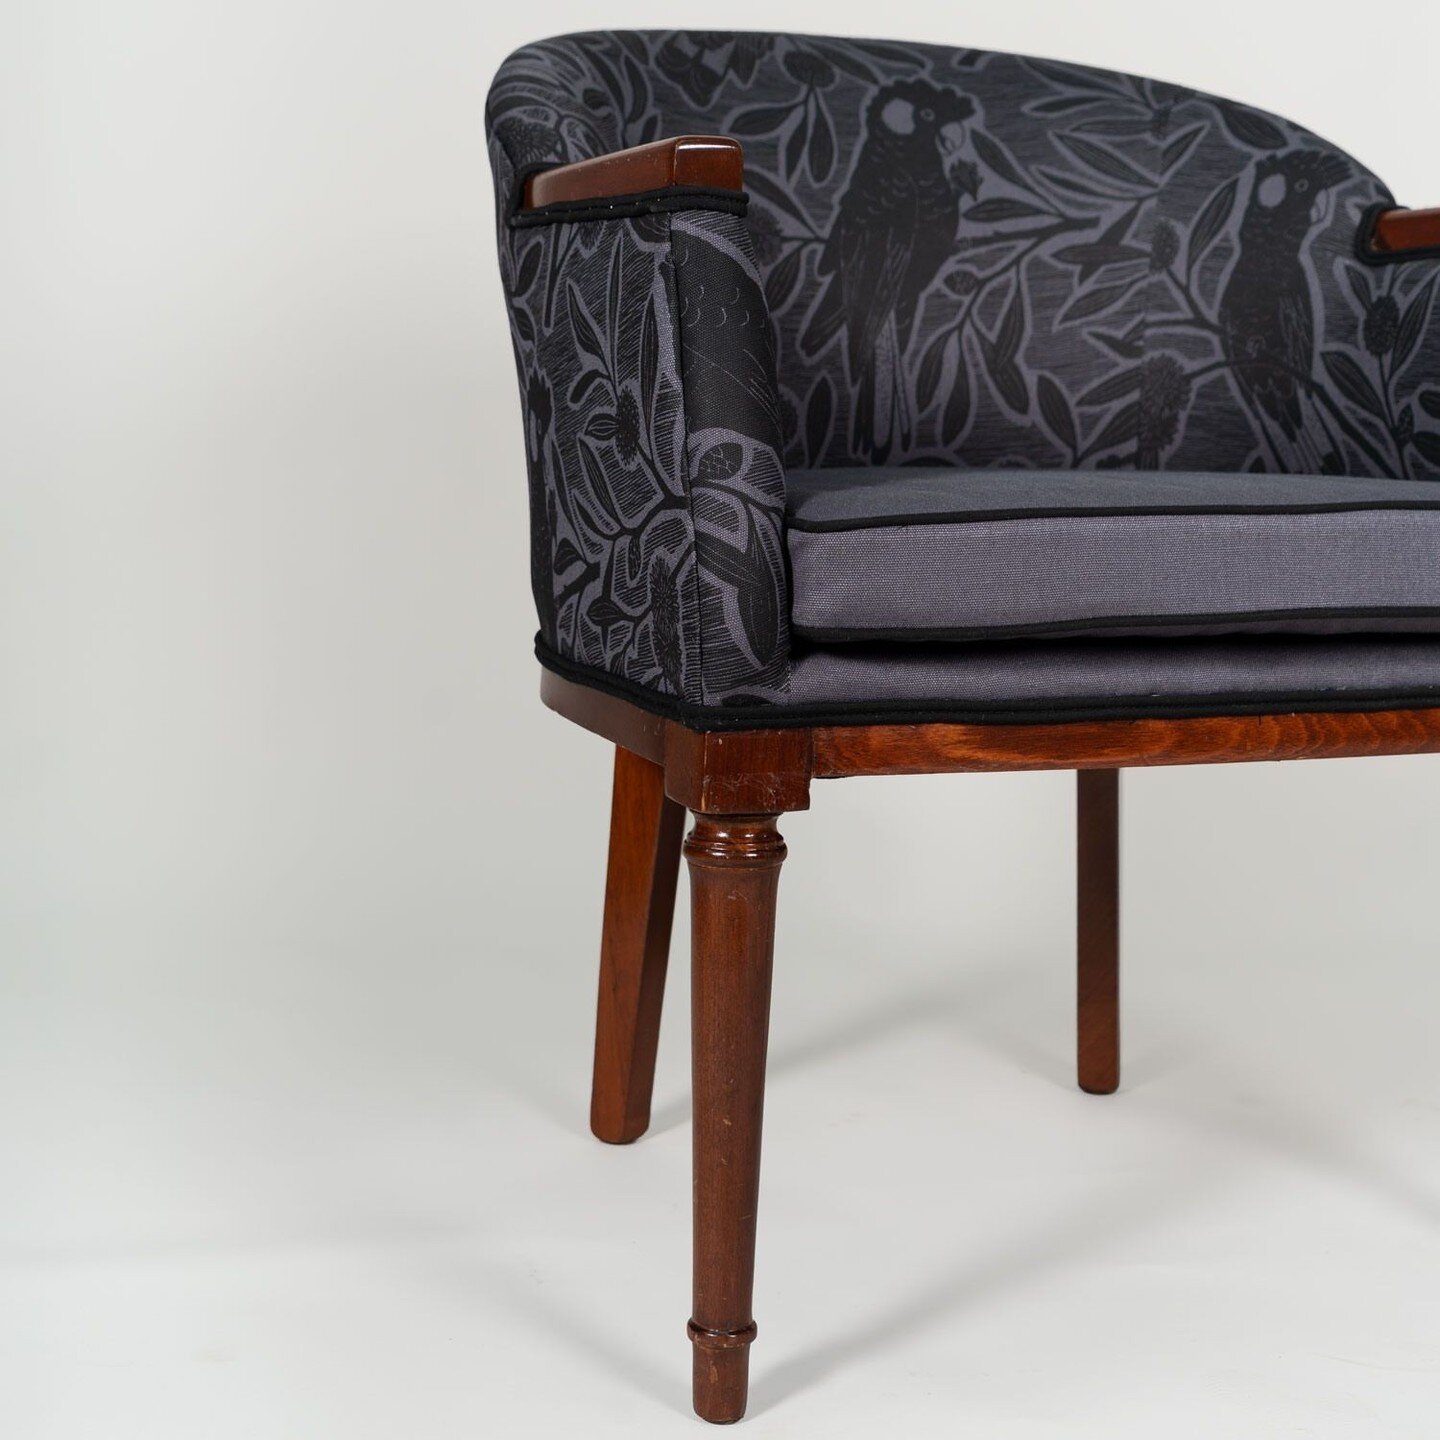 RESTORED FOR the City of Sydney

We reupholstered  these 2 Modern replica tub chairs with slightly different designs in the ink and spindle &quot; Black Cockatoo&quot; design. 

Aren't they just  gorgeous? Brings to show that with a fine bit of texti